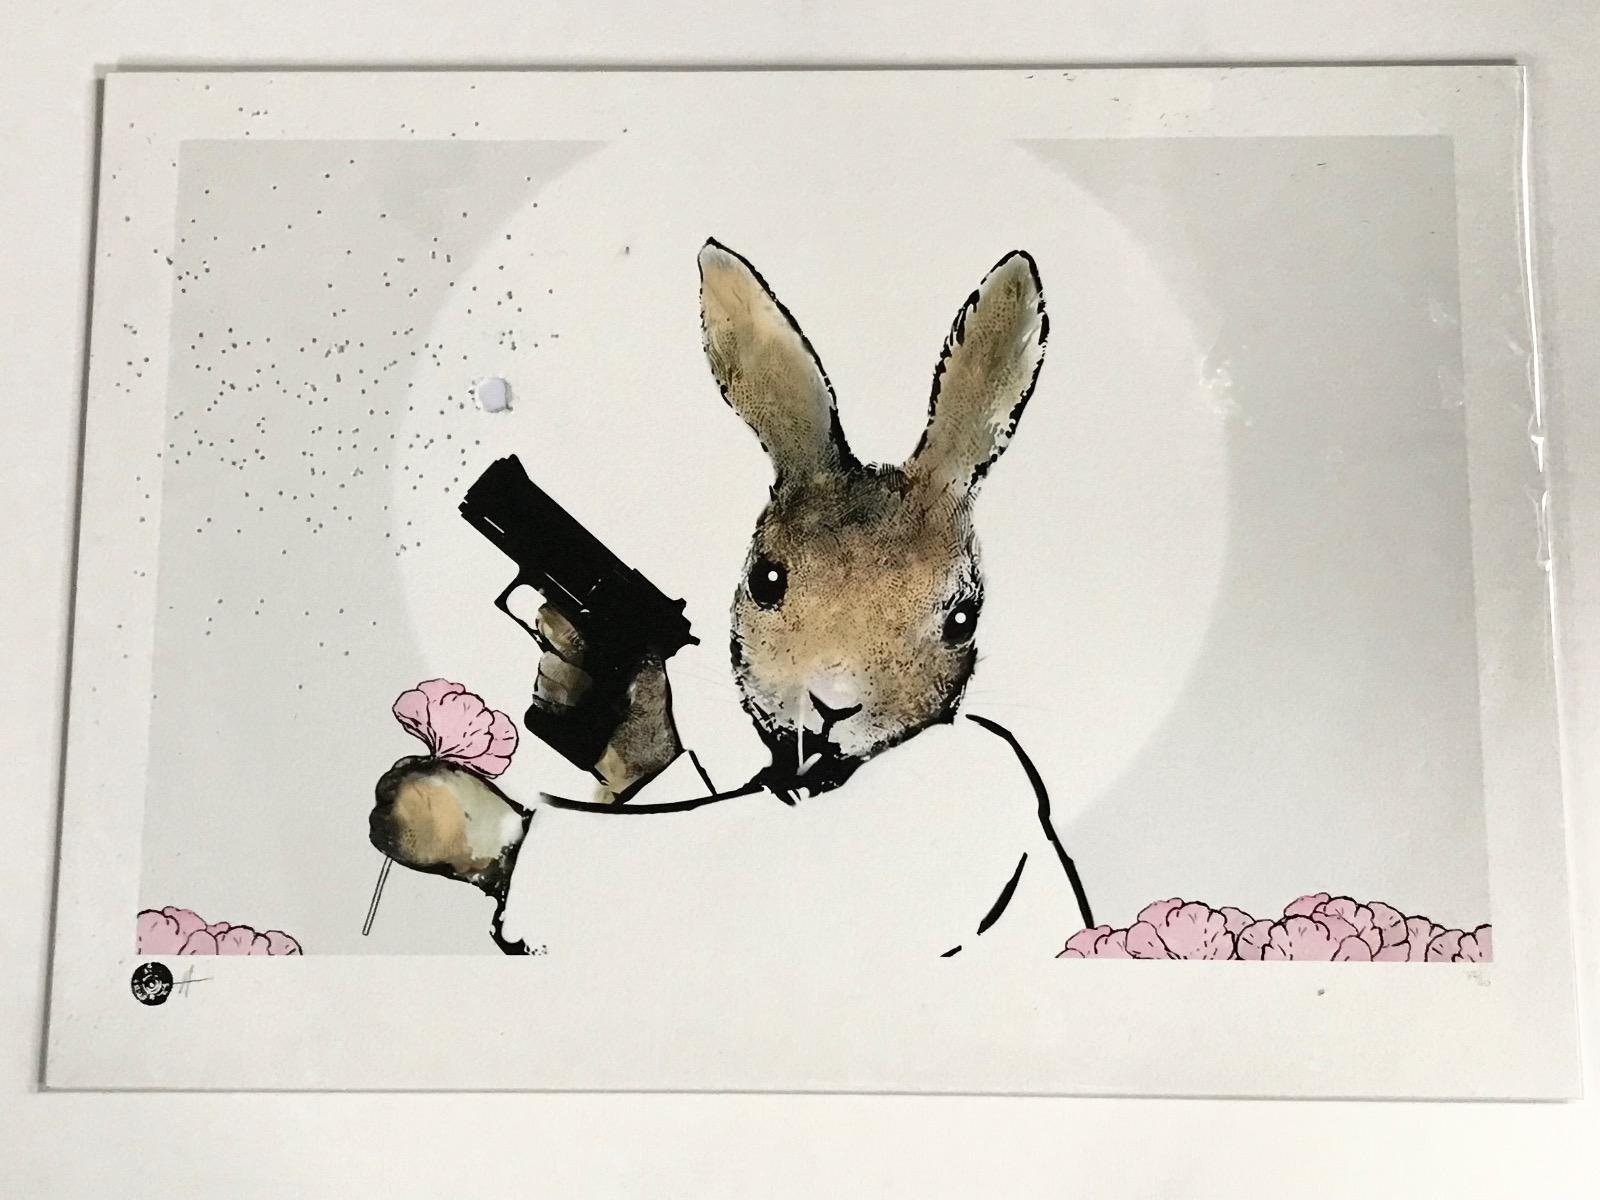 Rural Resistance Series - Home Guard, Animal print, Bunny, Abstract print - Contemporary Print by Harry Bunce